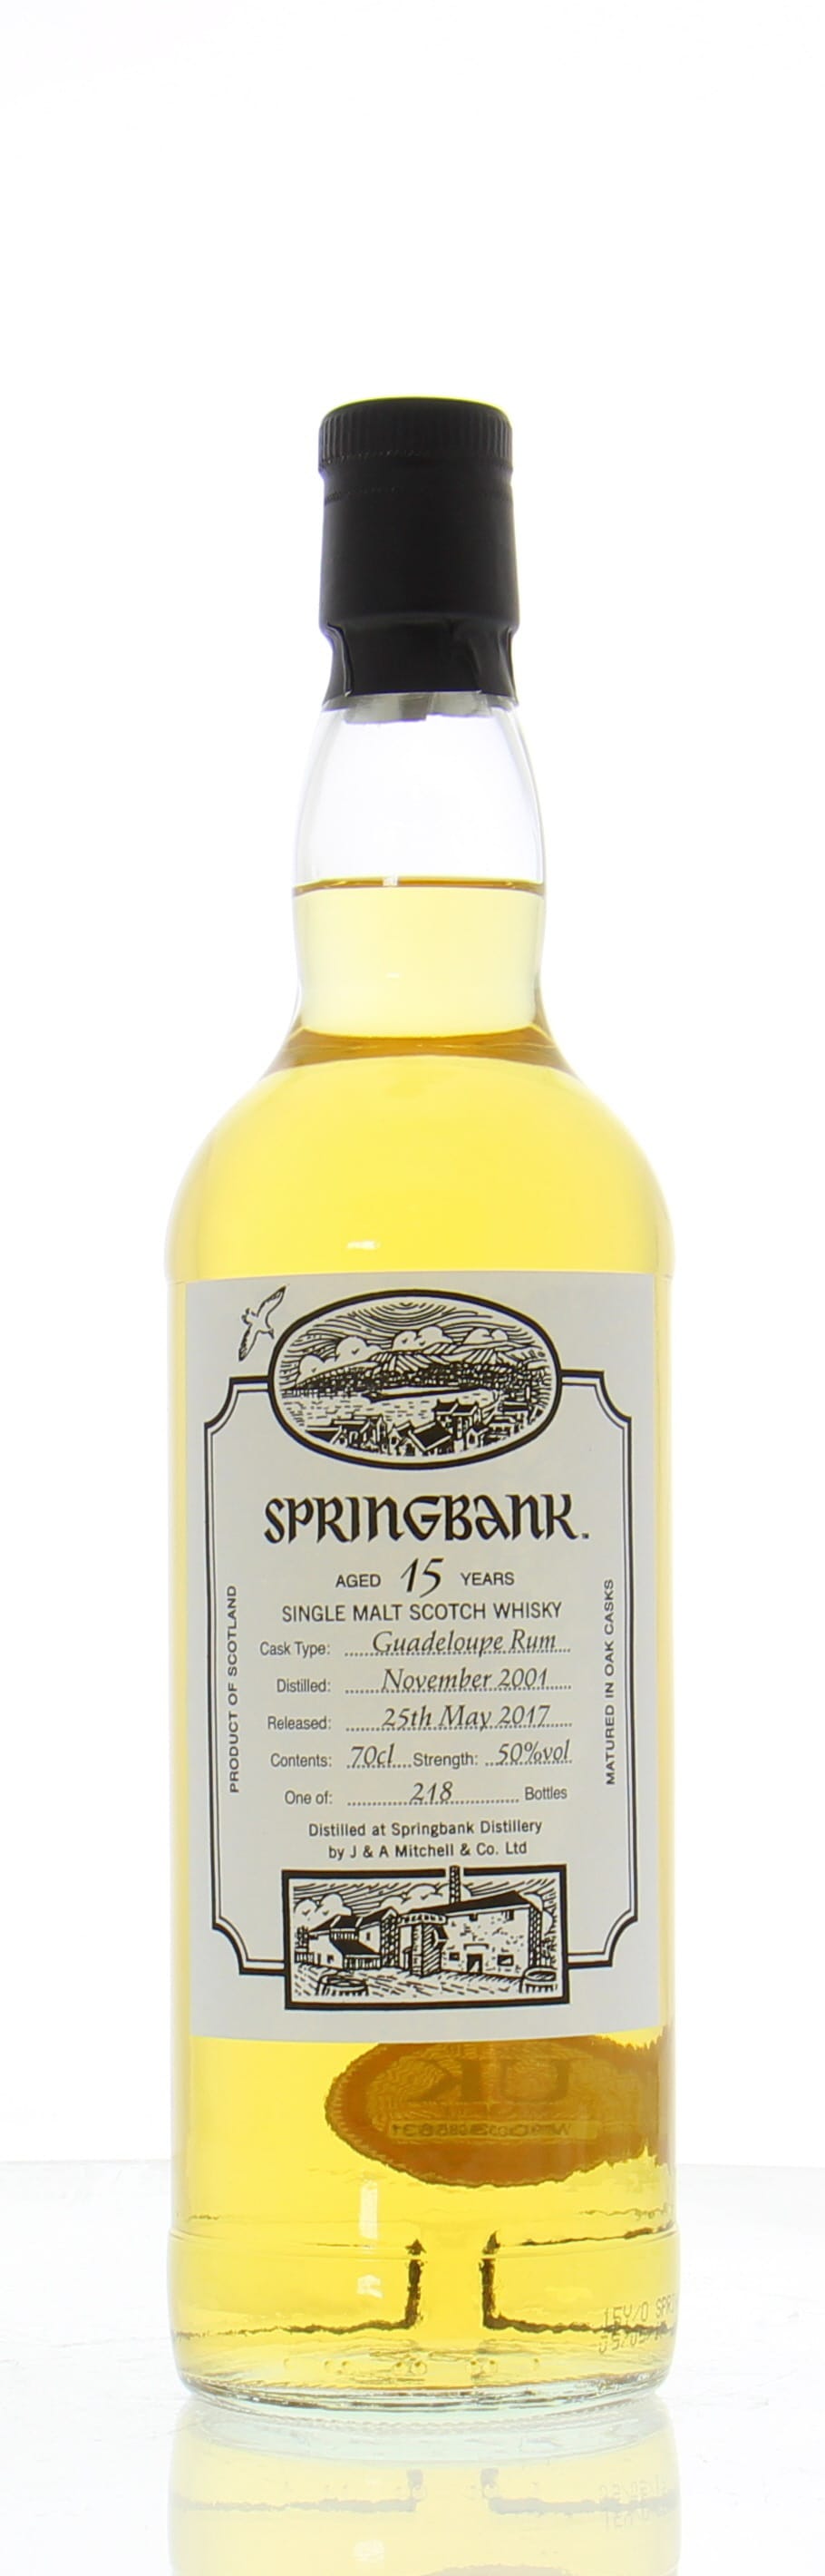 Springbank - 15 years Old Open day 2017 50% 2001